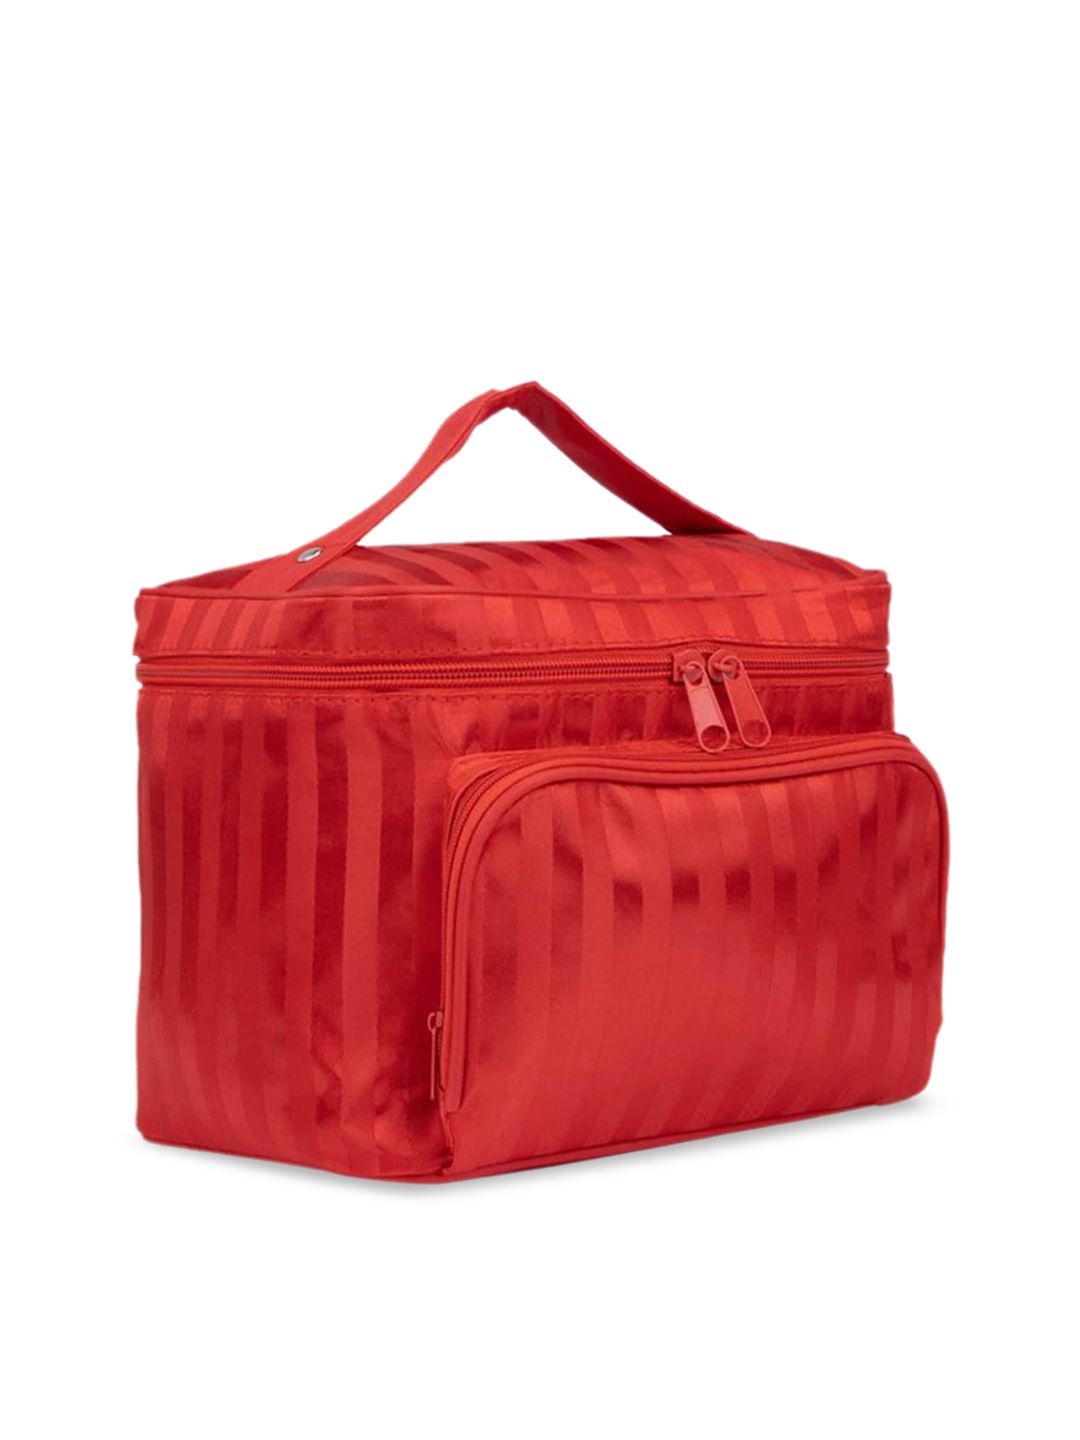 HOUSE OF QUIRK Striped Red Cosmetic Organisers Price in India